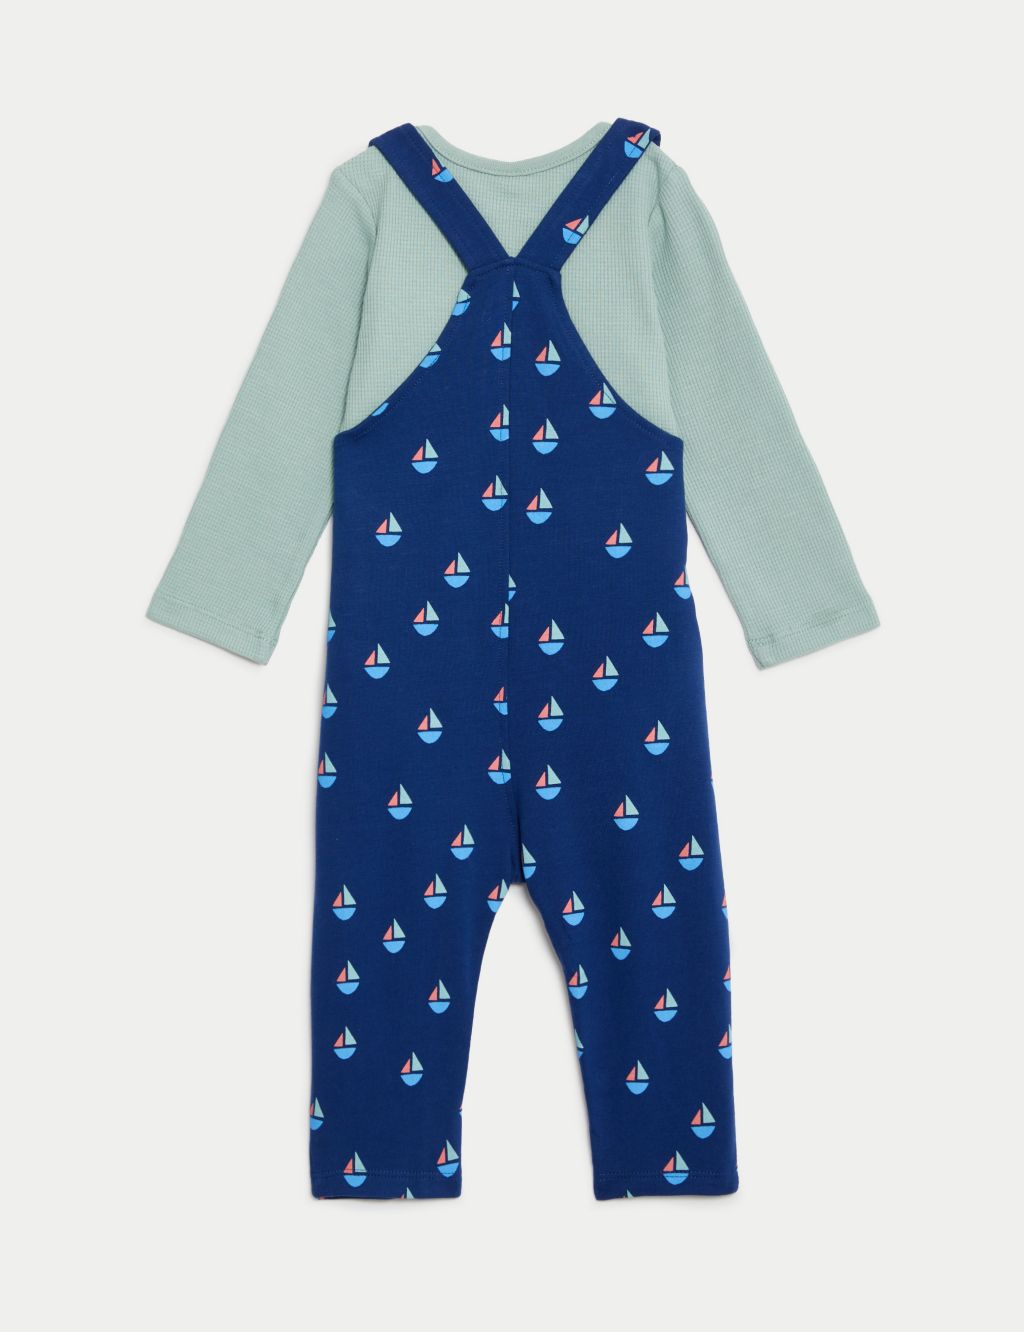 2pc Cotton Rich Boat Print Dungaree Outfit (0-3 Yrs) image 3